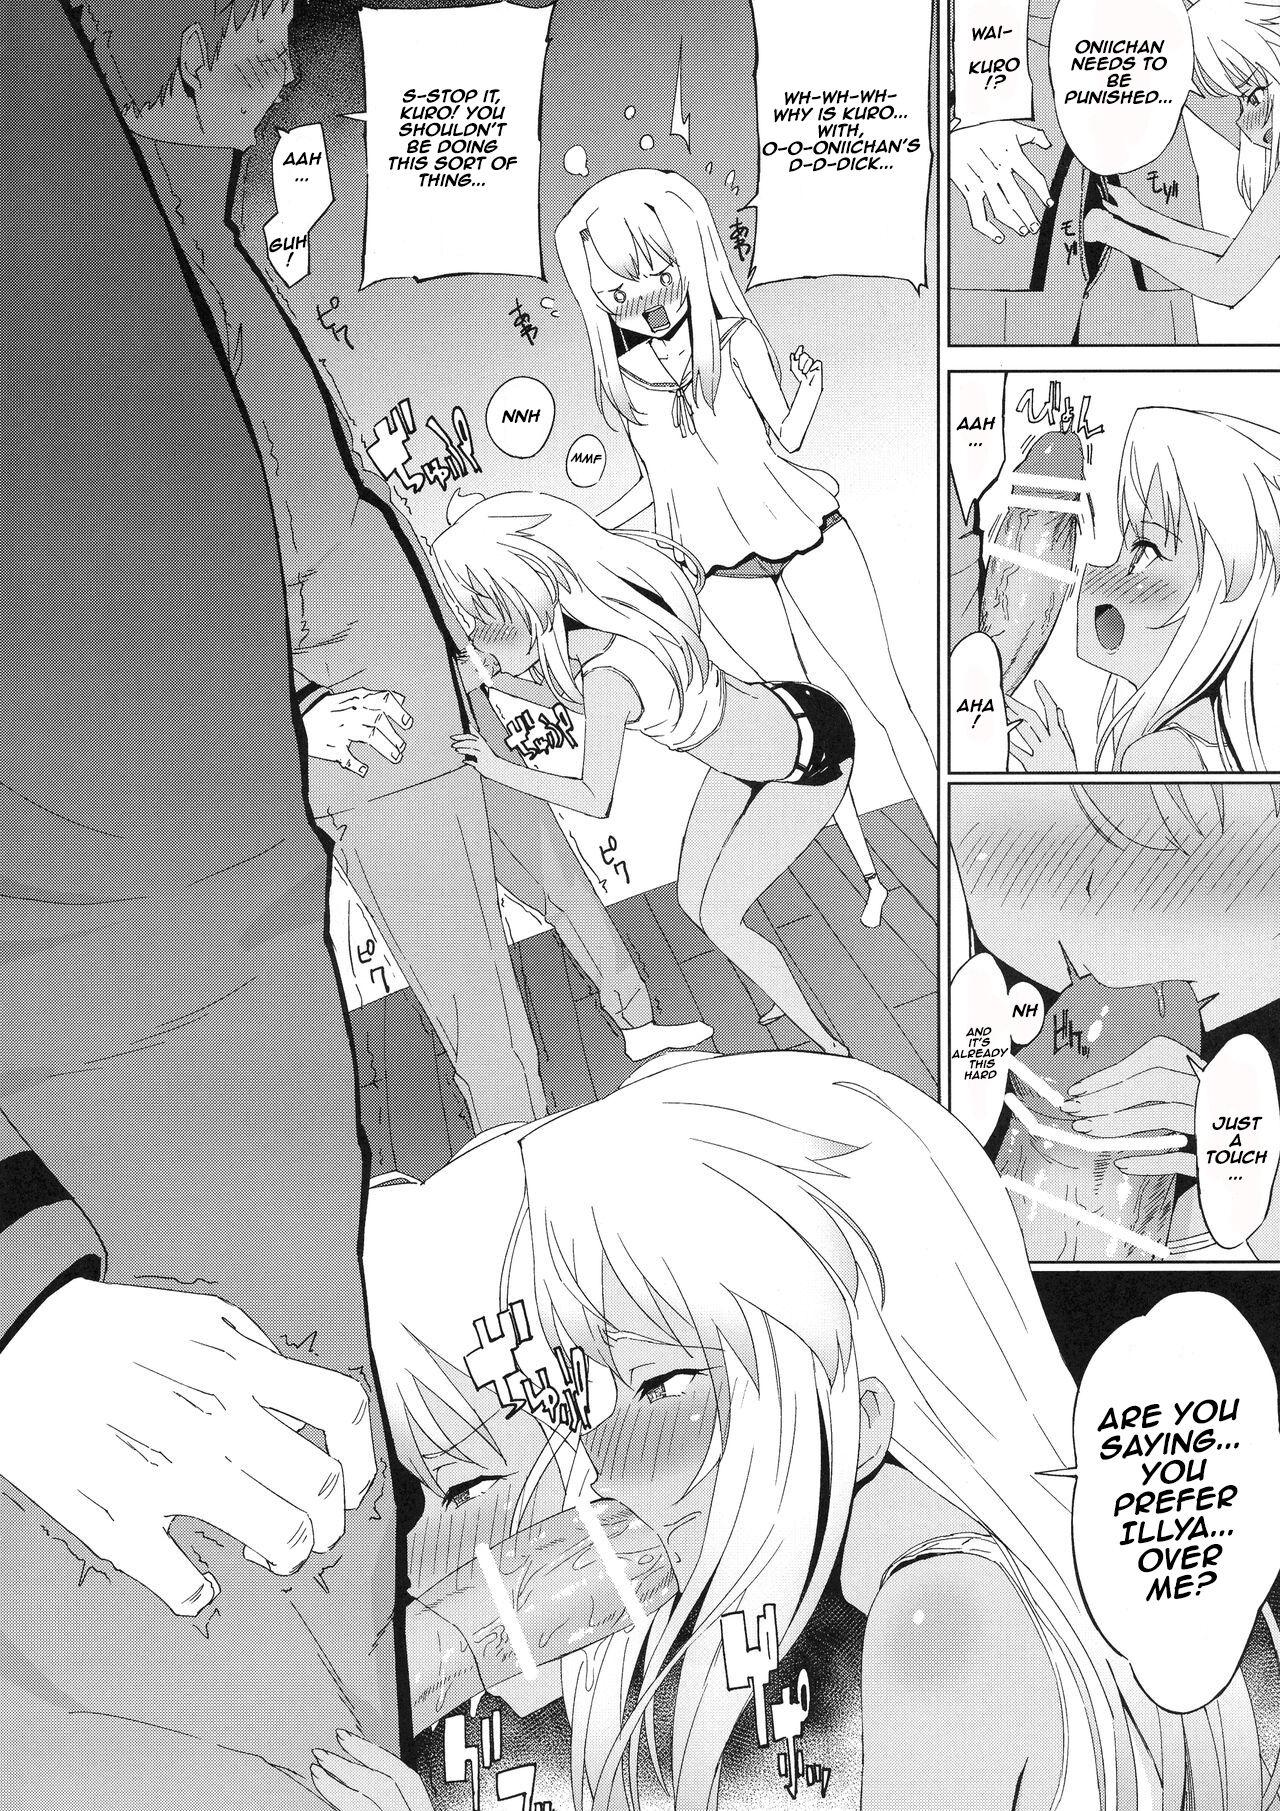 Vagina Oshiete Onii-chan - Fate kaleid liner prisma illya Candid - Page 4